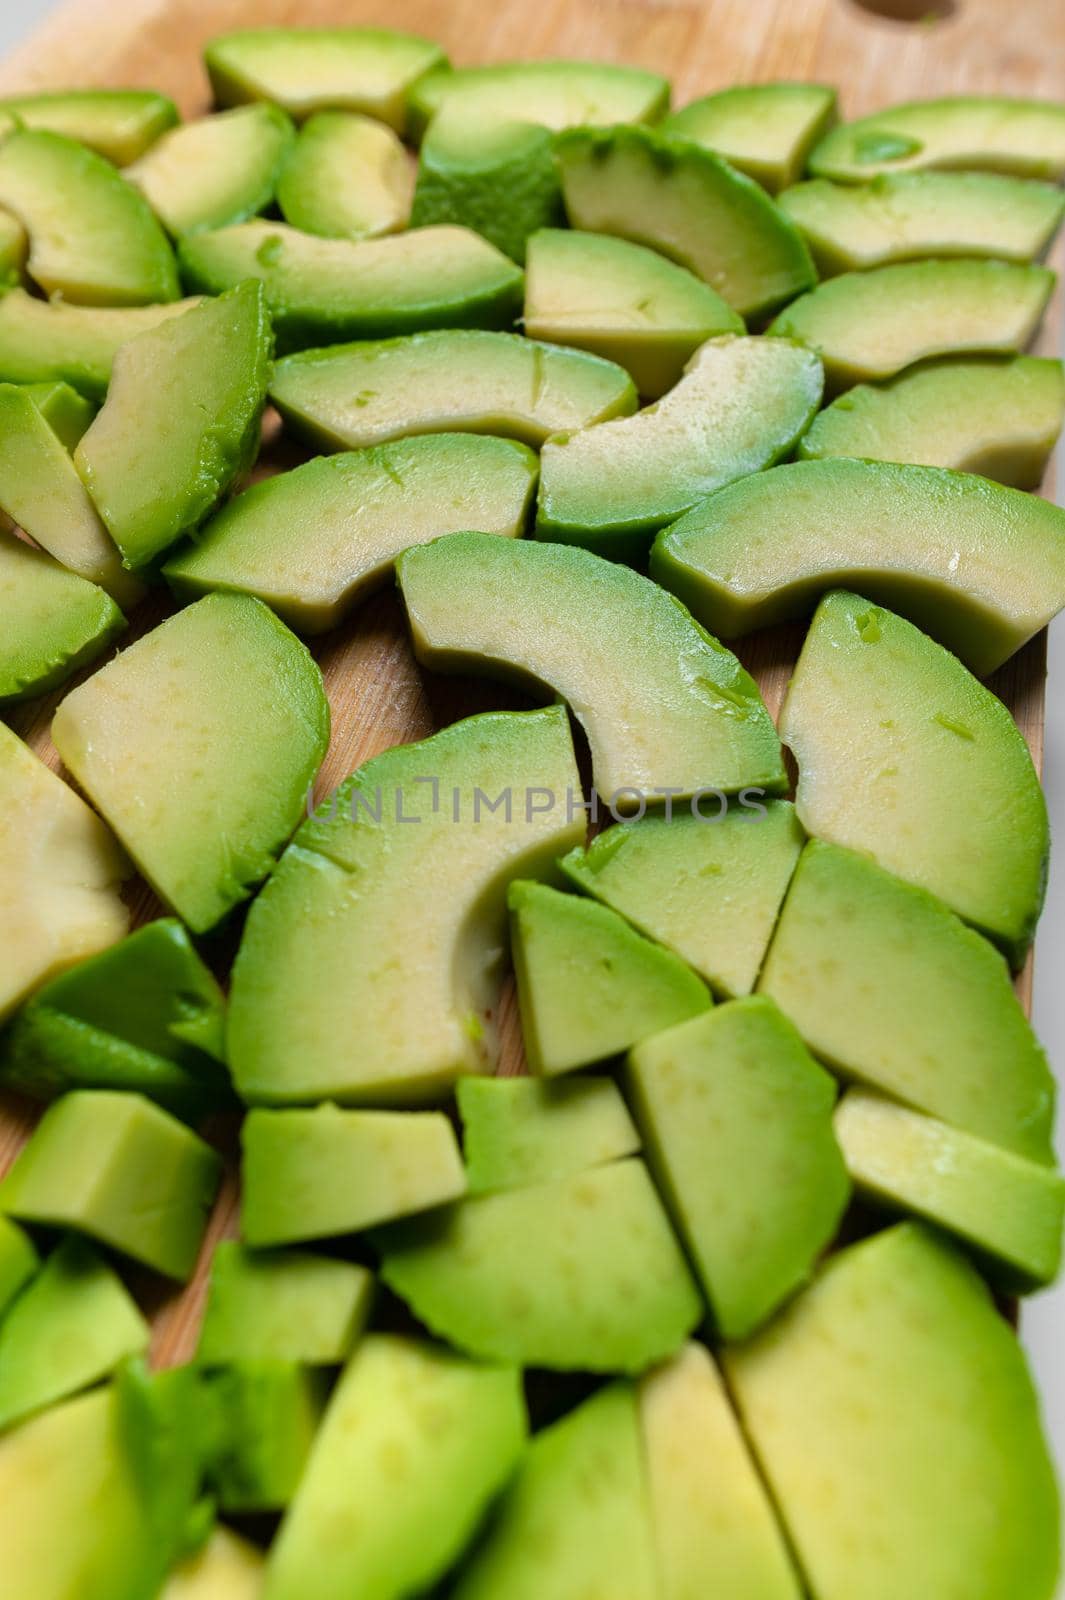 sliced avocado into small pieces lie on a cutting wooden board. food background.